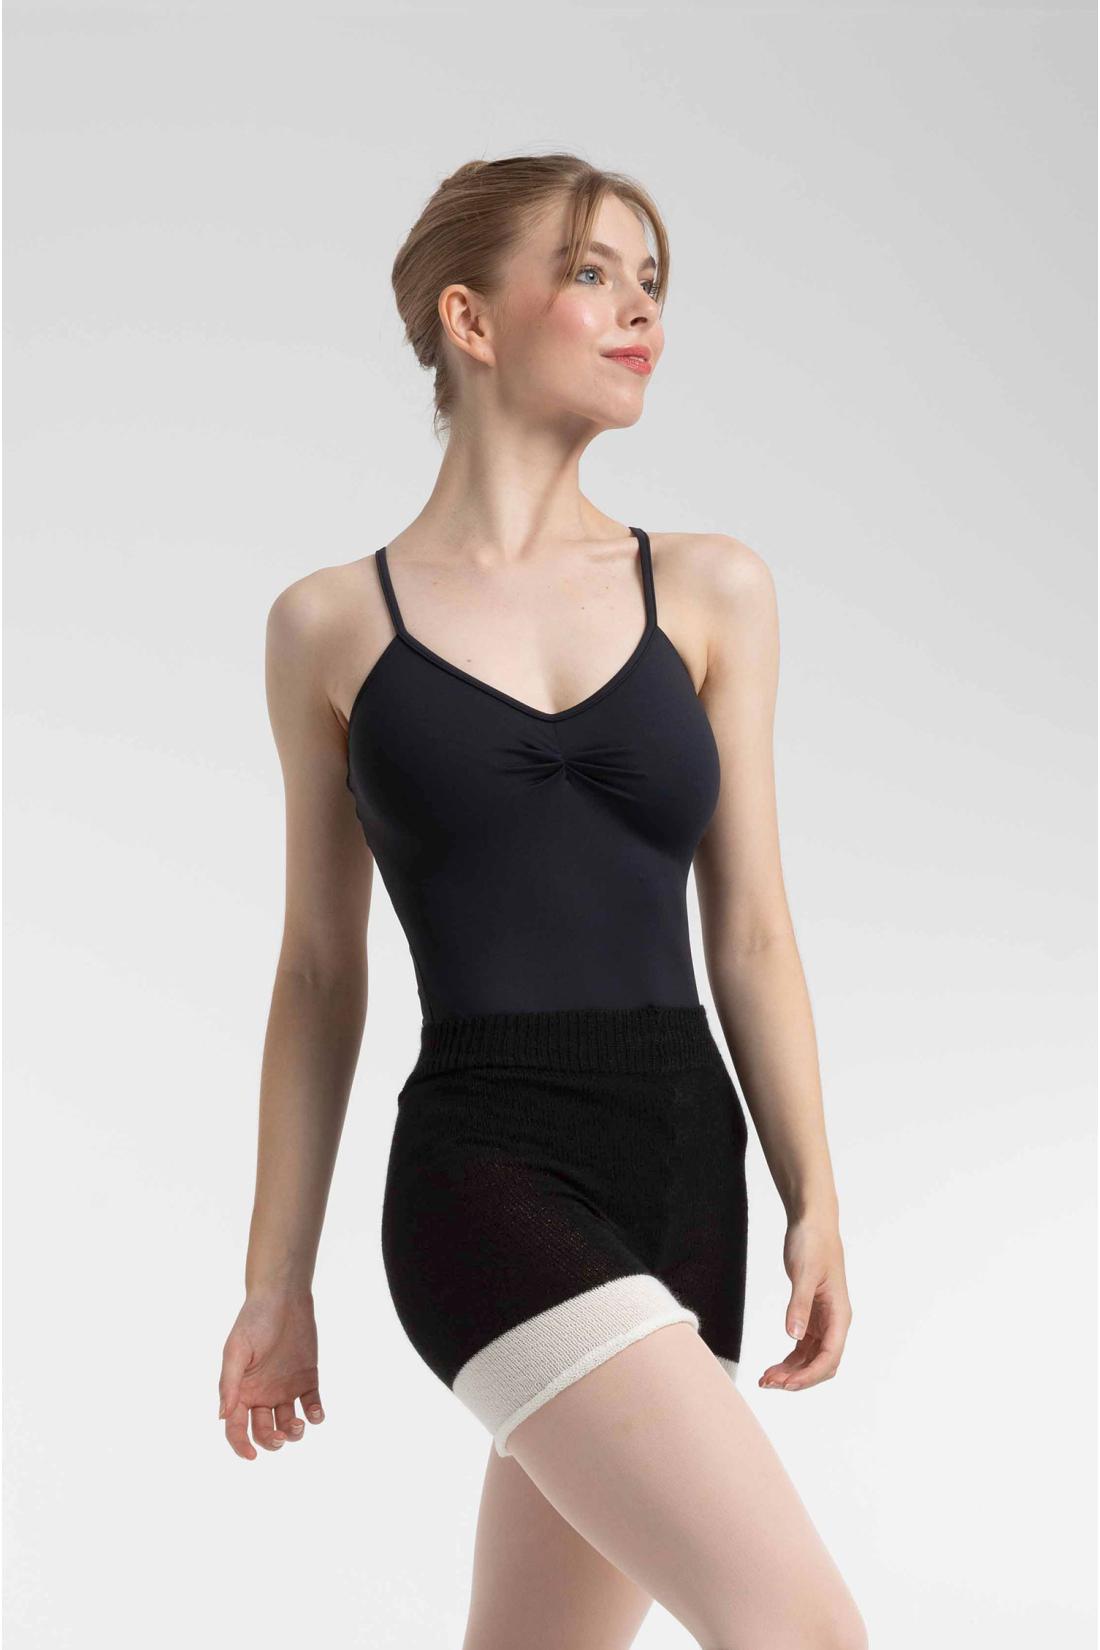 Acer Knitted Shorts in two colors Intermezzo dance ballet